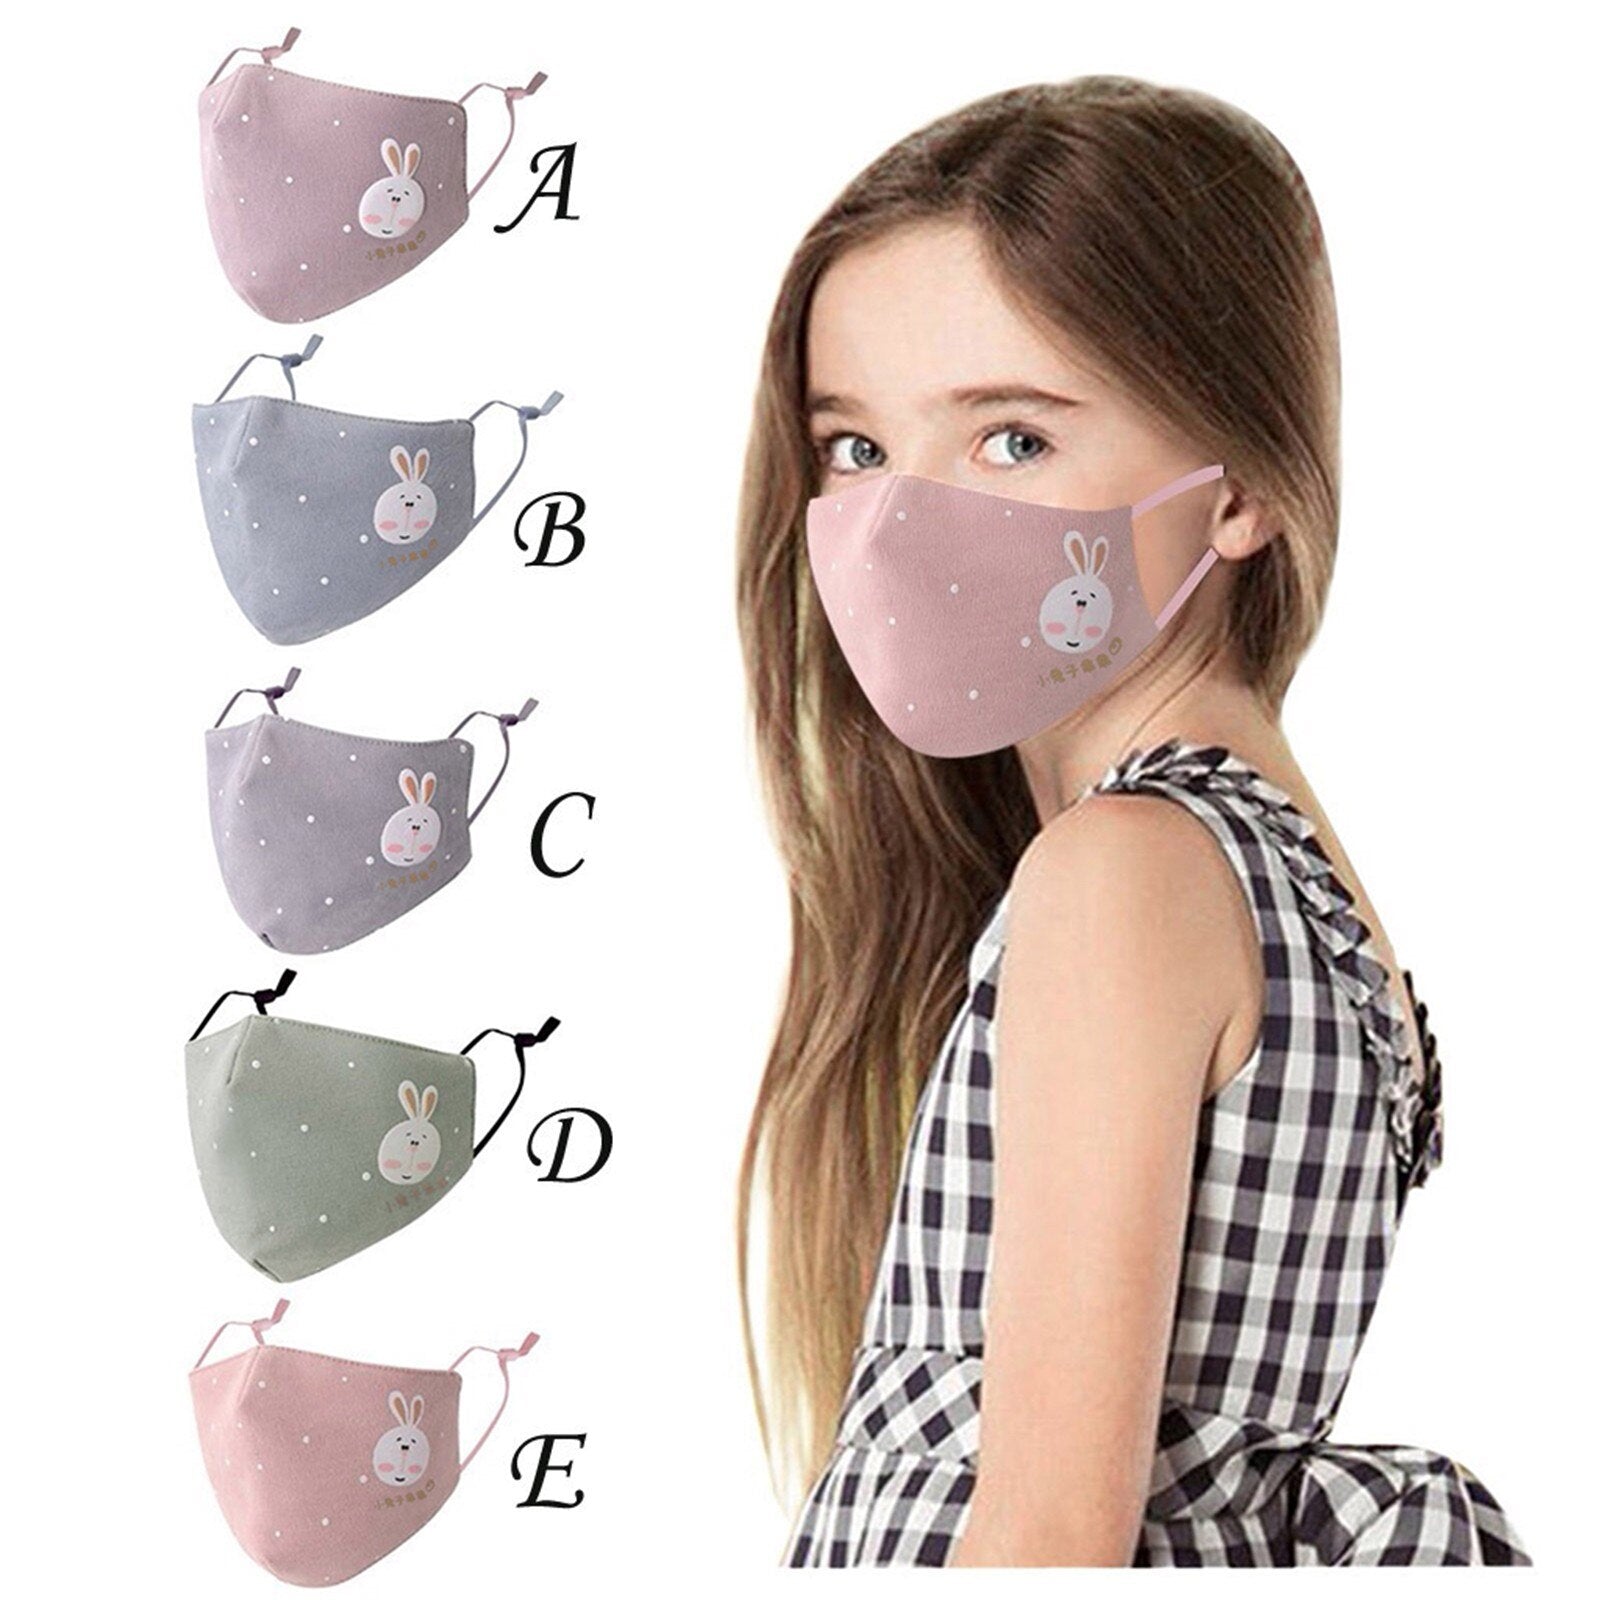 Print Face Mask For Face With Children Girl Cartoon Adjustable Washable 3-Layer Cotton Protection Mask Halloween Cosplay